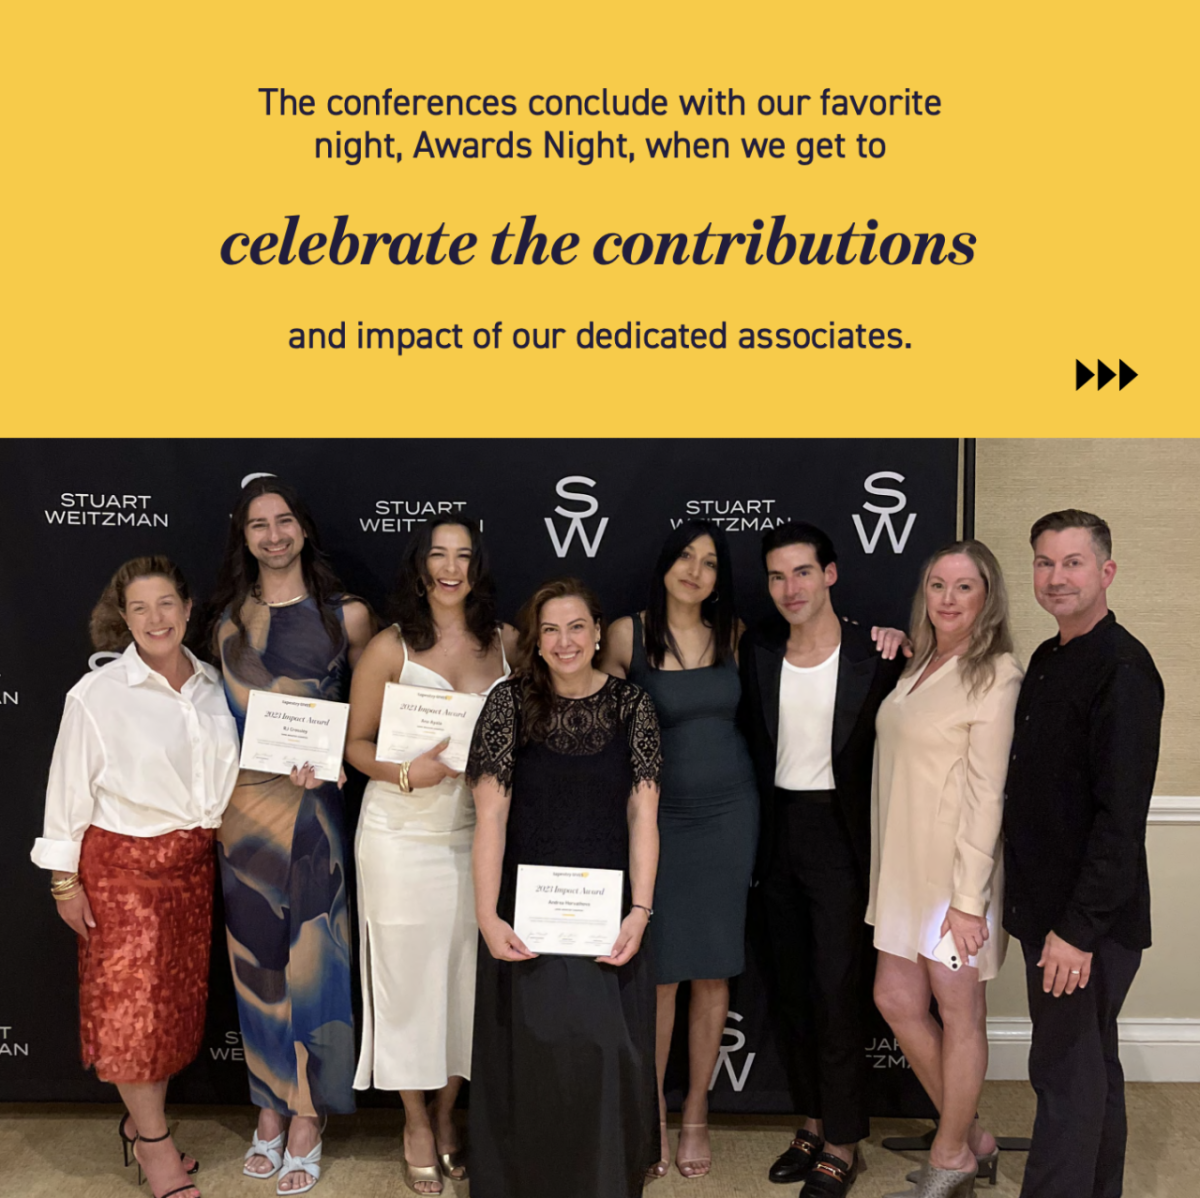 "The conferences conclude with our favorite night, Awards Night, when we get to celebrate the contributions and impact of our dedicated associates."